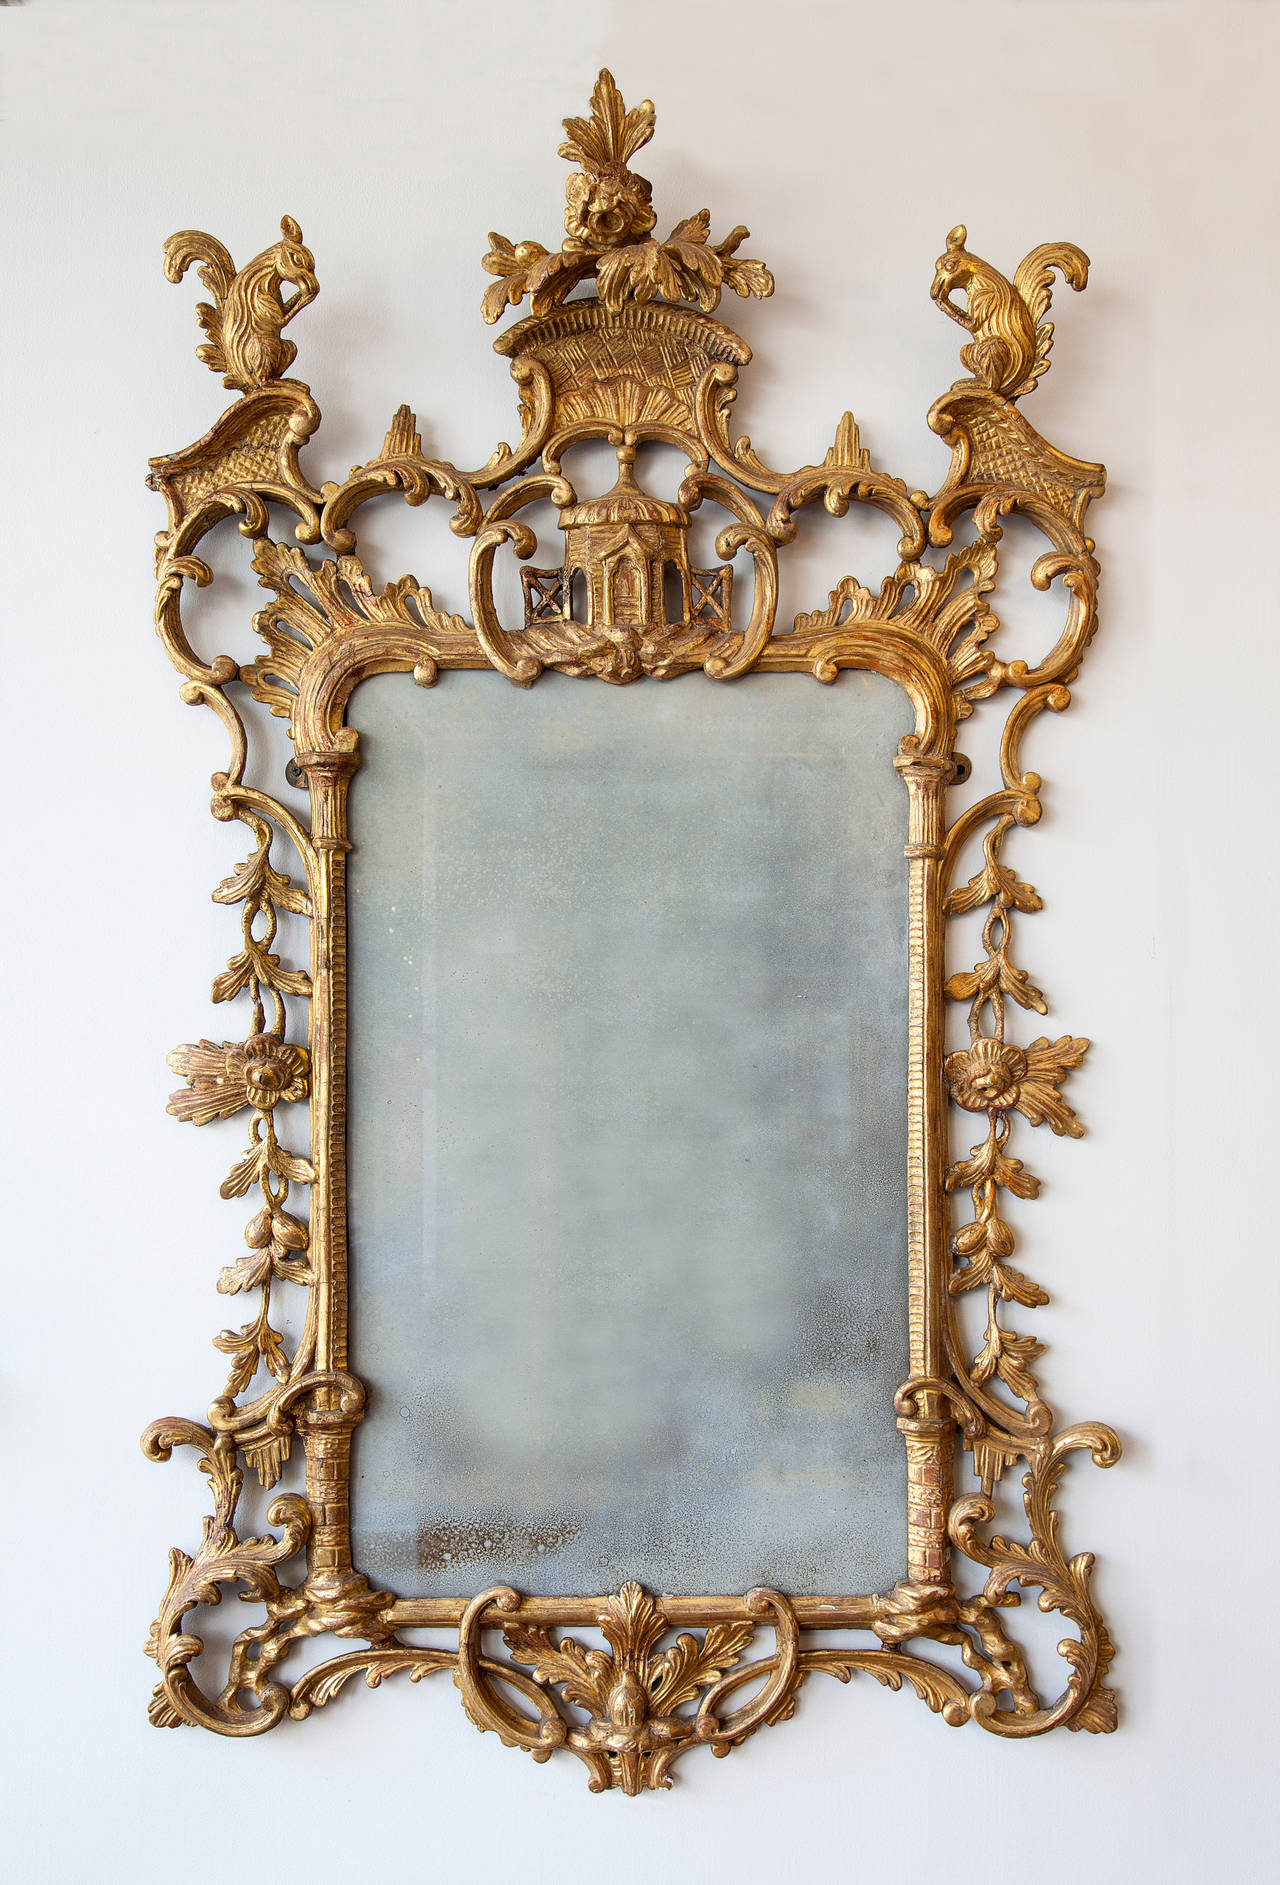 Large giltwood girandole mirror with two squirrels  over a pagoda. Verticle  rectangular plate and frame flanked by carved fretwork branches and vines with leaves and scrolled decoration centering a carved base. Circa late 18th century.